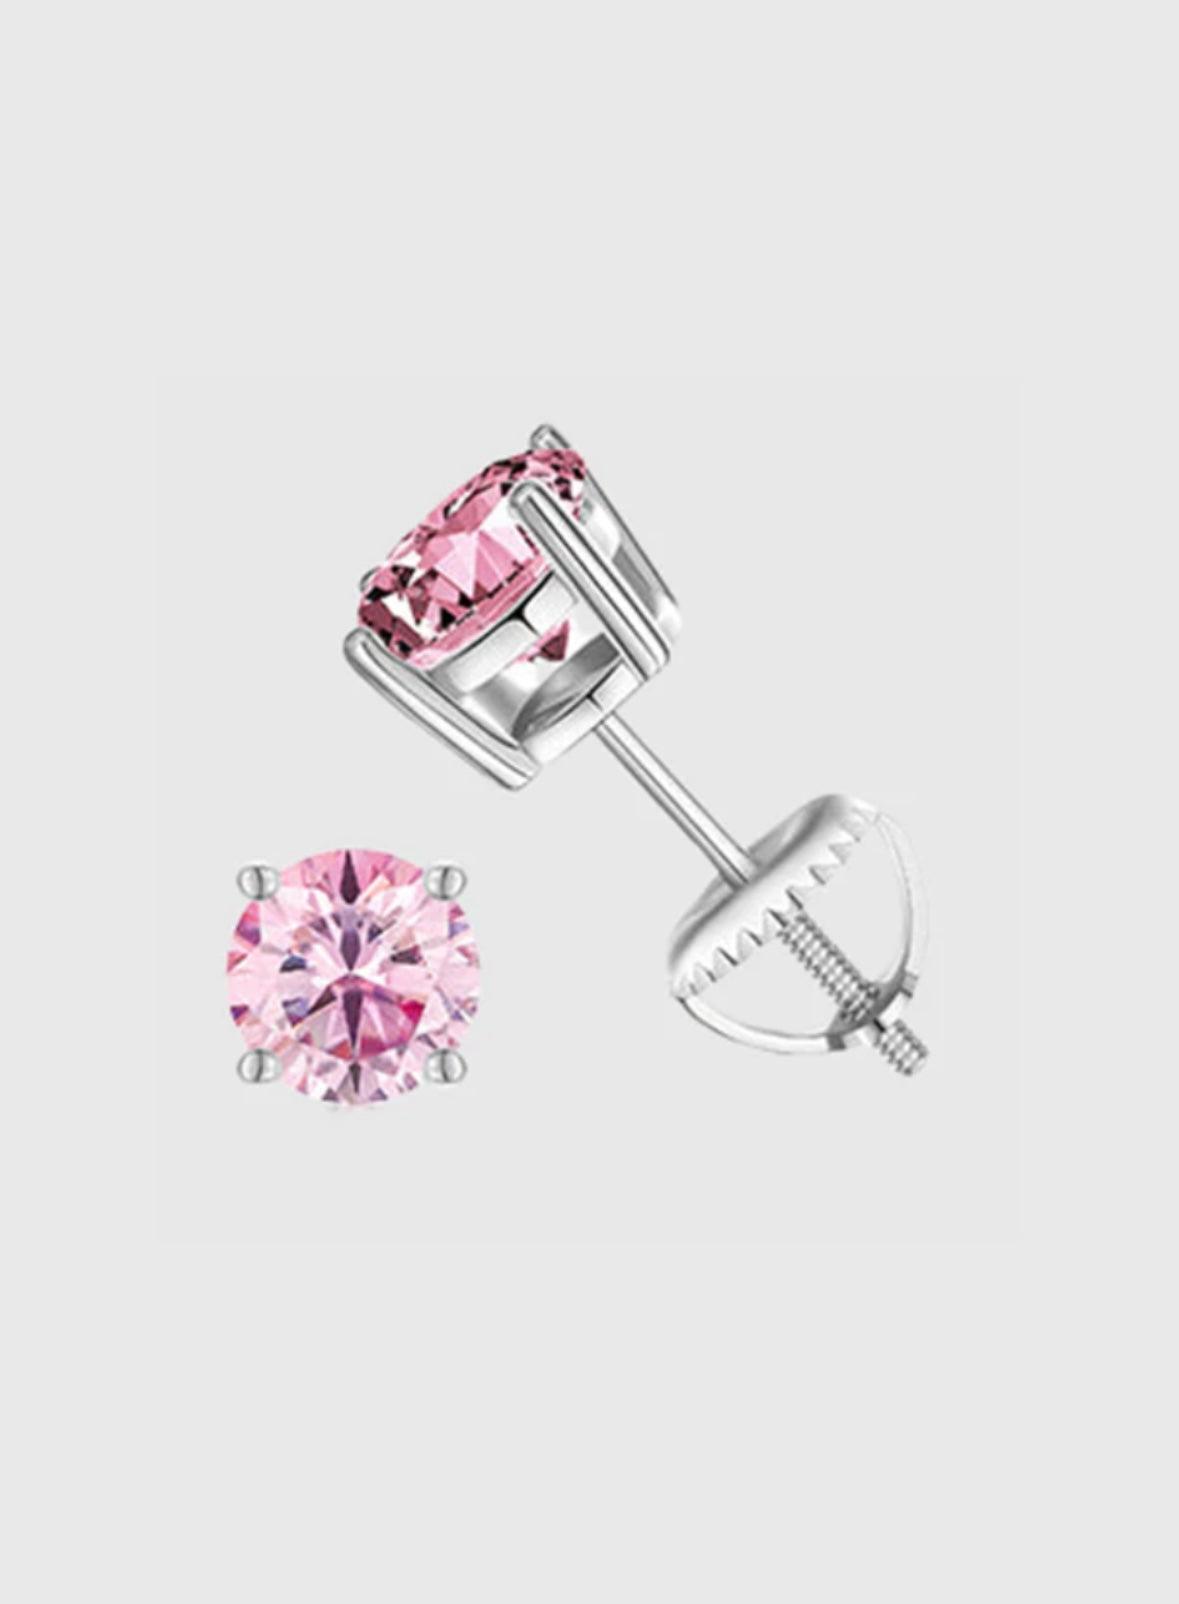 PINK VVS ROUND 1CT EARRINGS - WHITE GOLD VERMEIL - GLACIFY